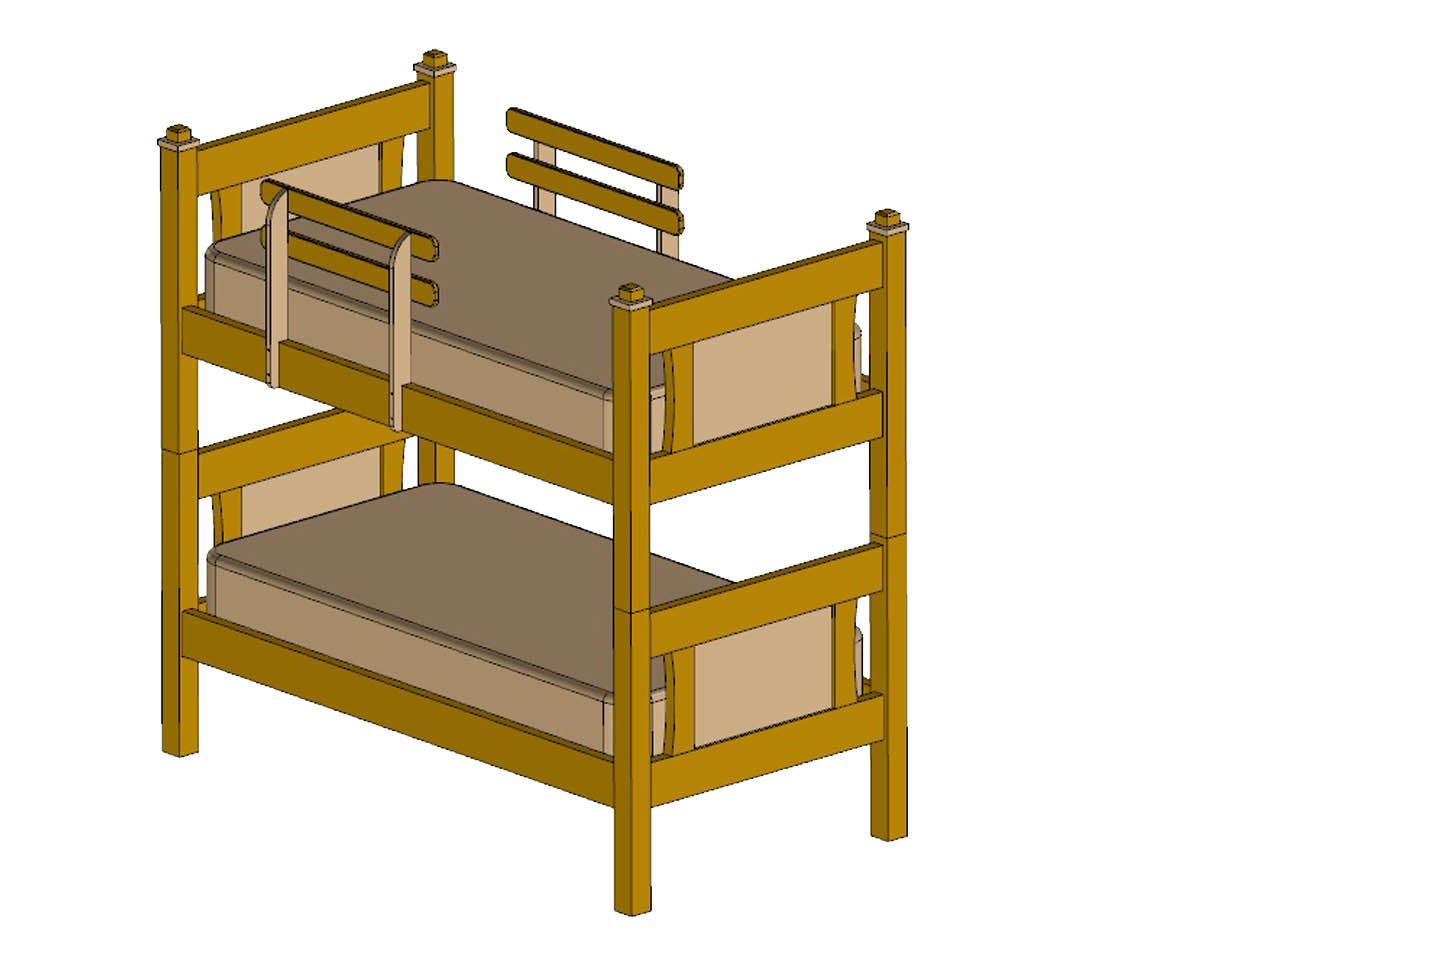 Designing for Wood: Bunk Bed